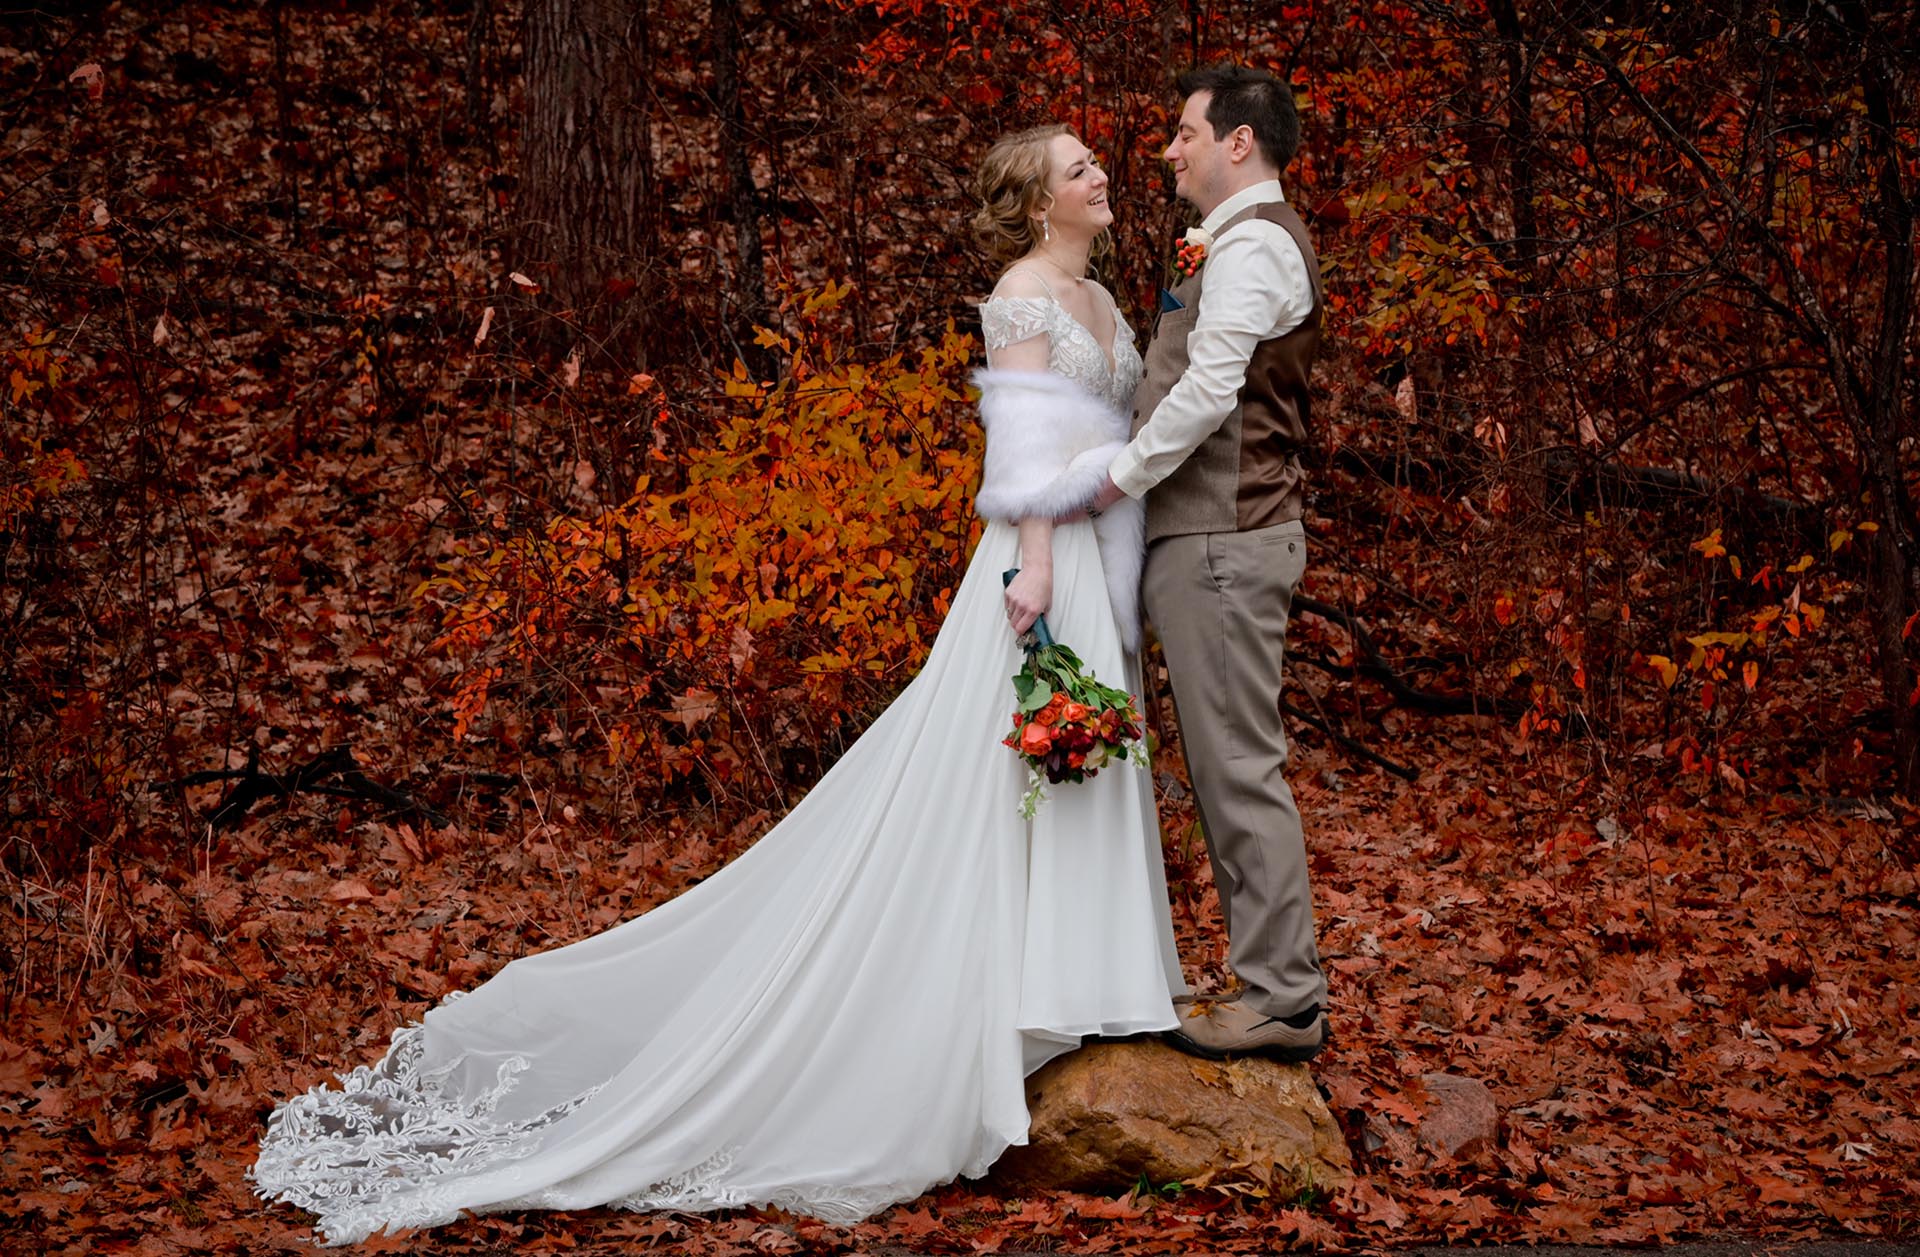 Bride and groom pose in the fall at Waldenwoods Resort in Howell, Michigan surrounded by leaves.